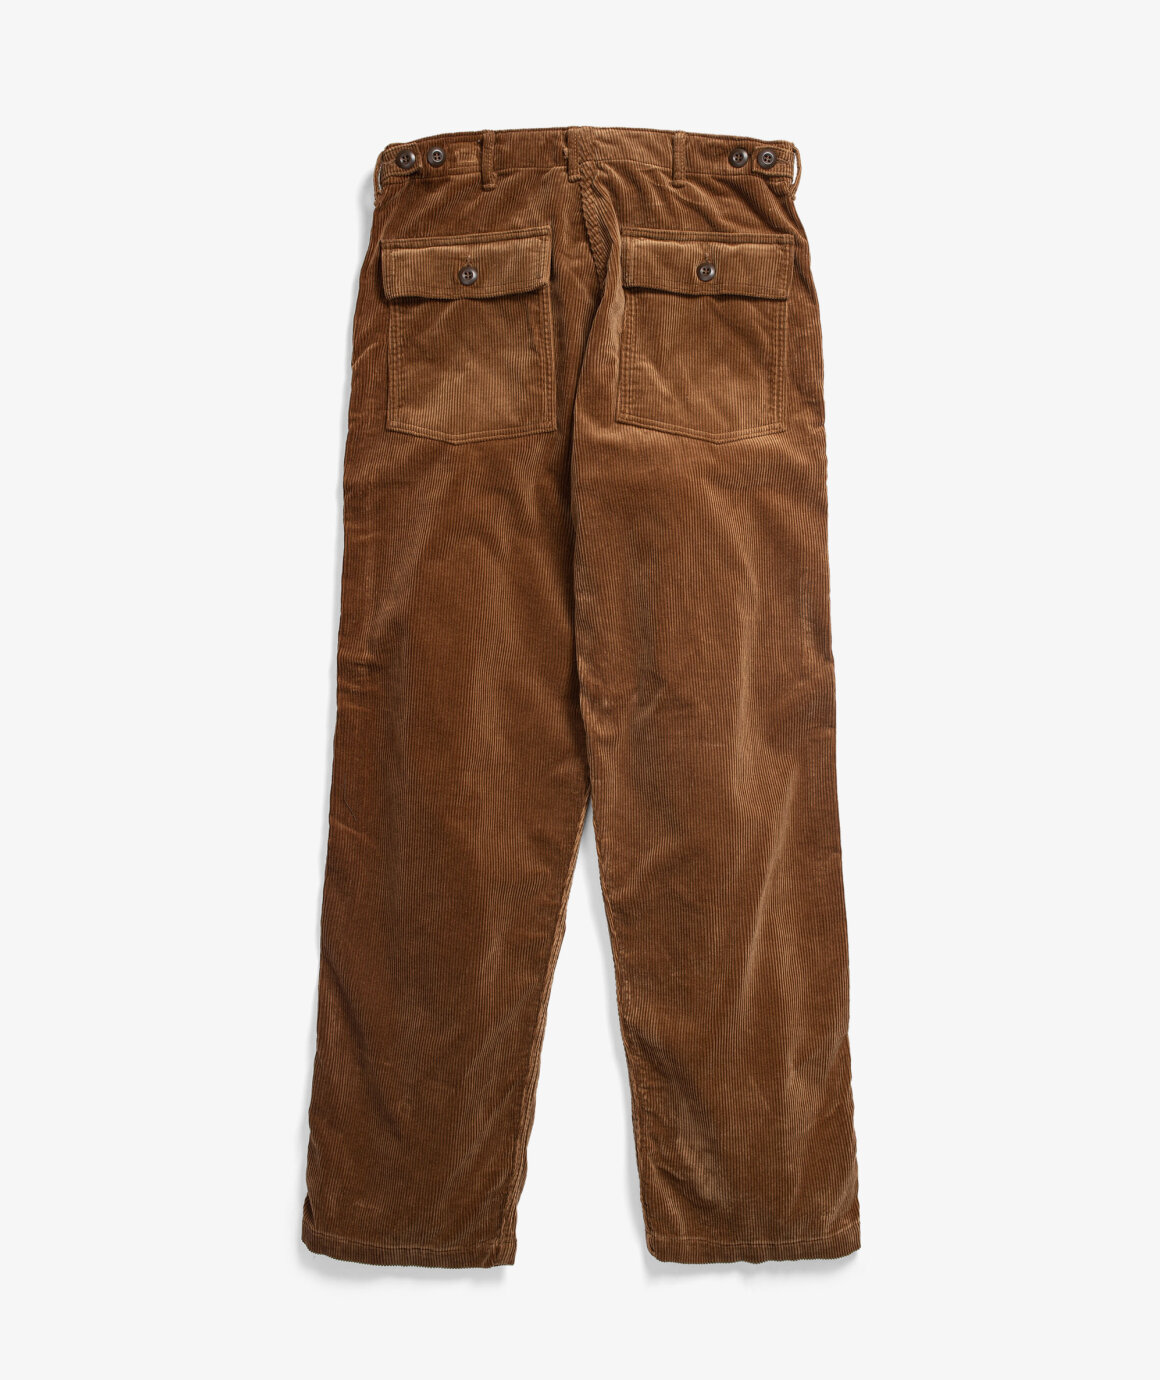 Norse Store | Shipping Worldwide - orSlow US ARMY FATIGUE CORDUROY ...